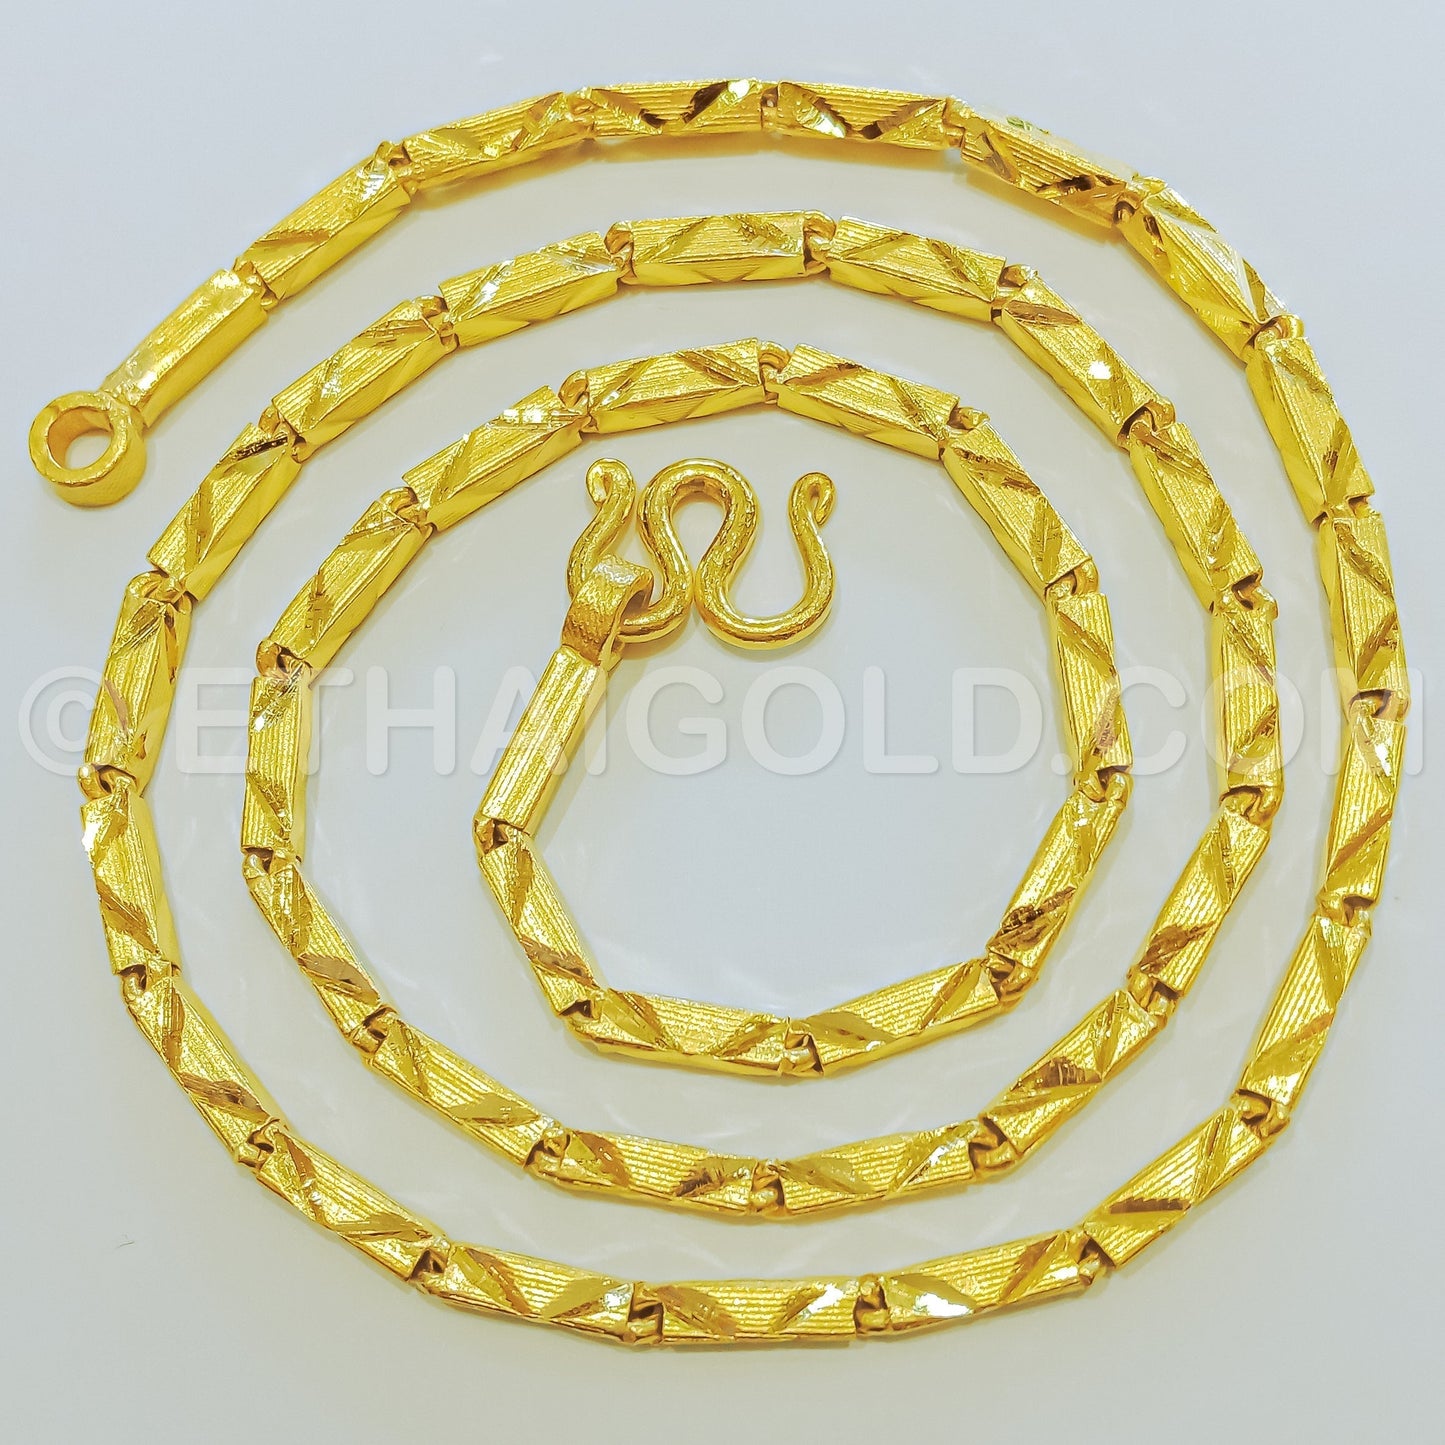 4 BAHT MATTE DIAMOND-CUT SOLID SQUARE BARREL CHAIN NECKLACE IN 23K GOLD (ID: N2004B)